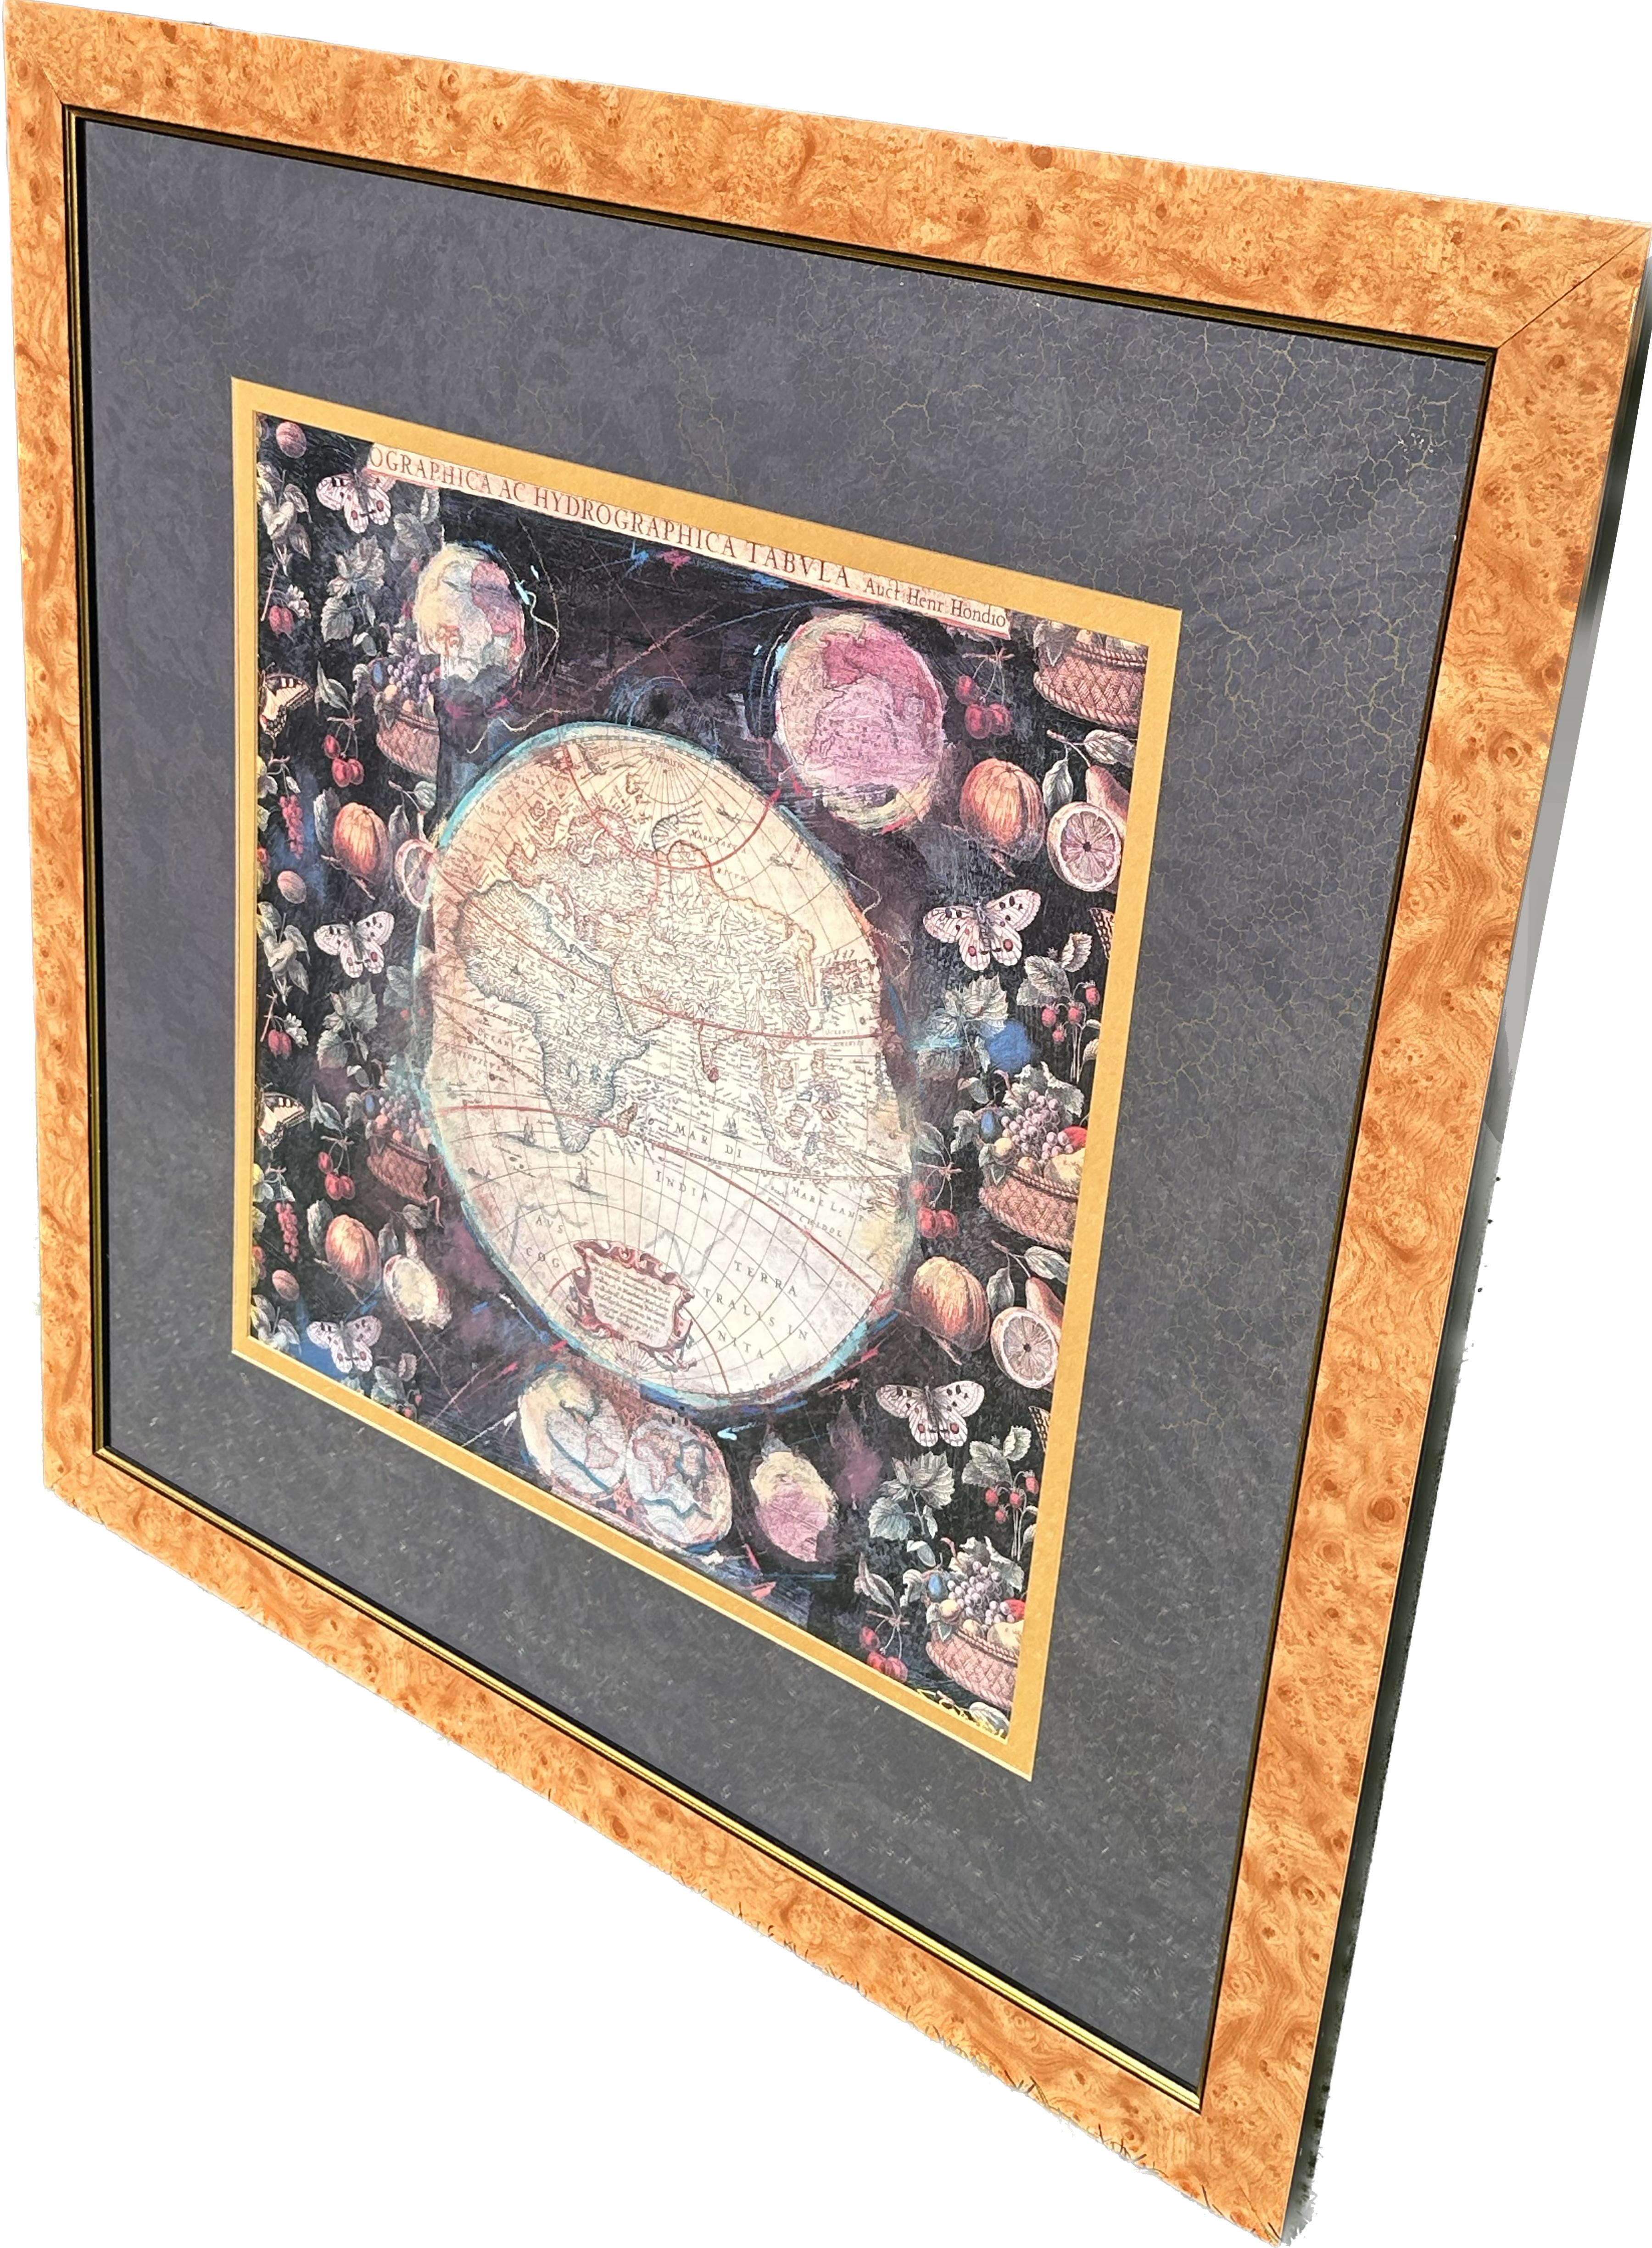 Paper Pair of Prints Depicting Antique World Maps Framed in Burl Wood  For Sale